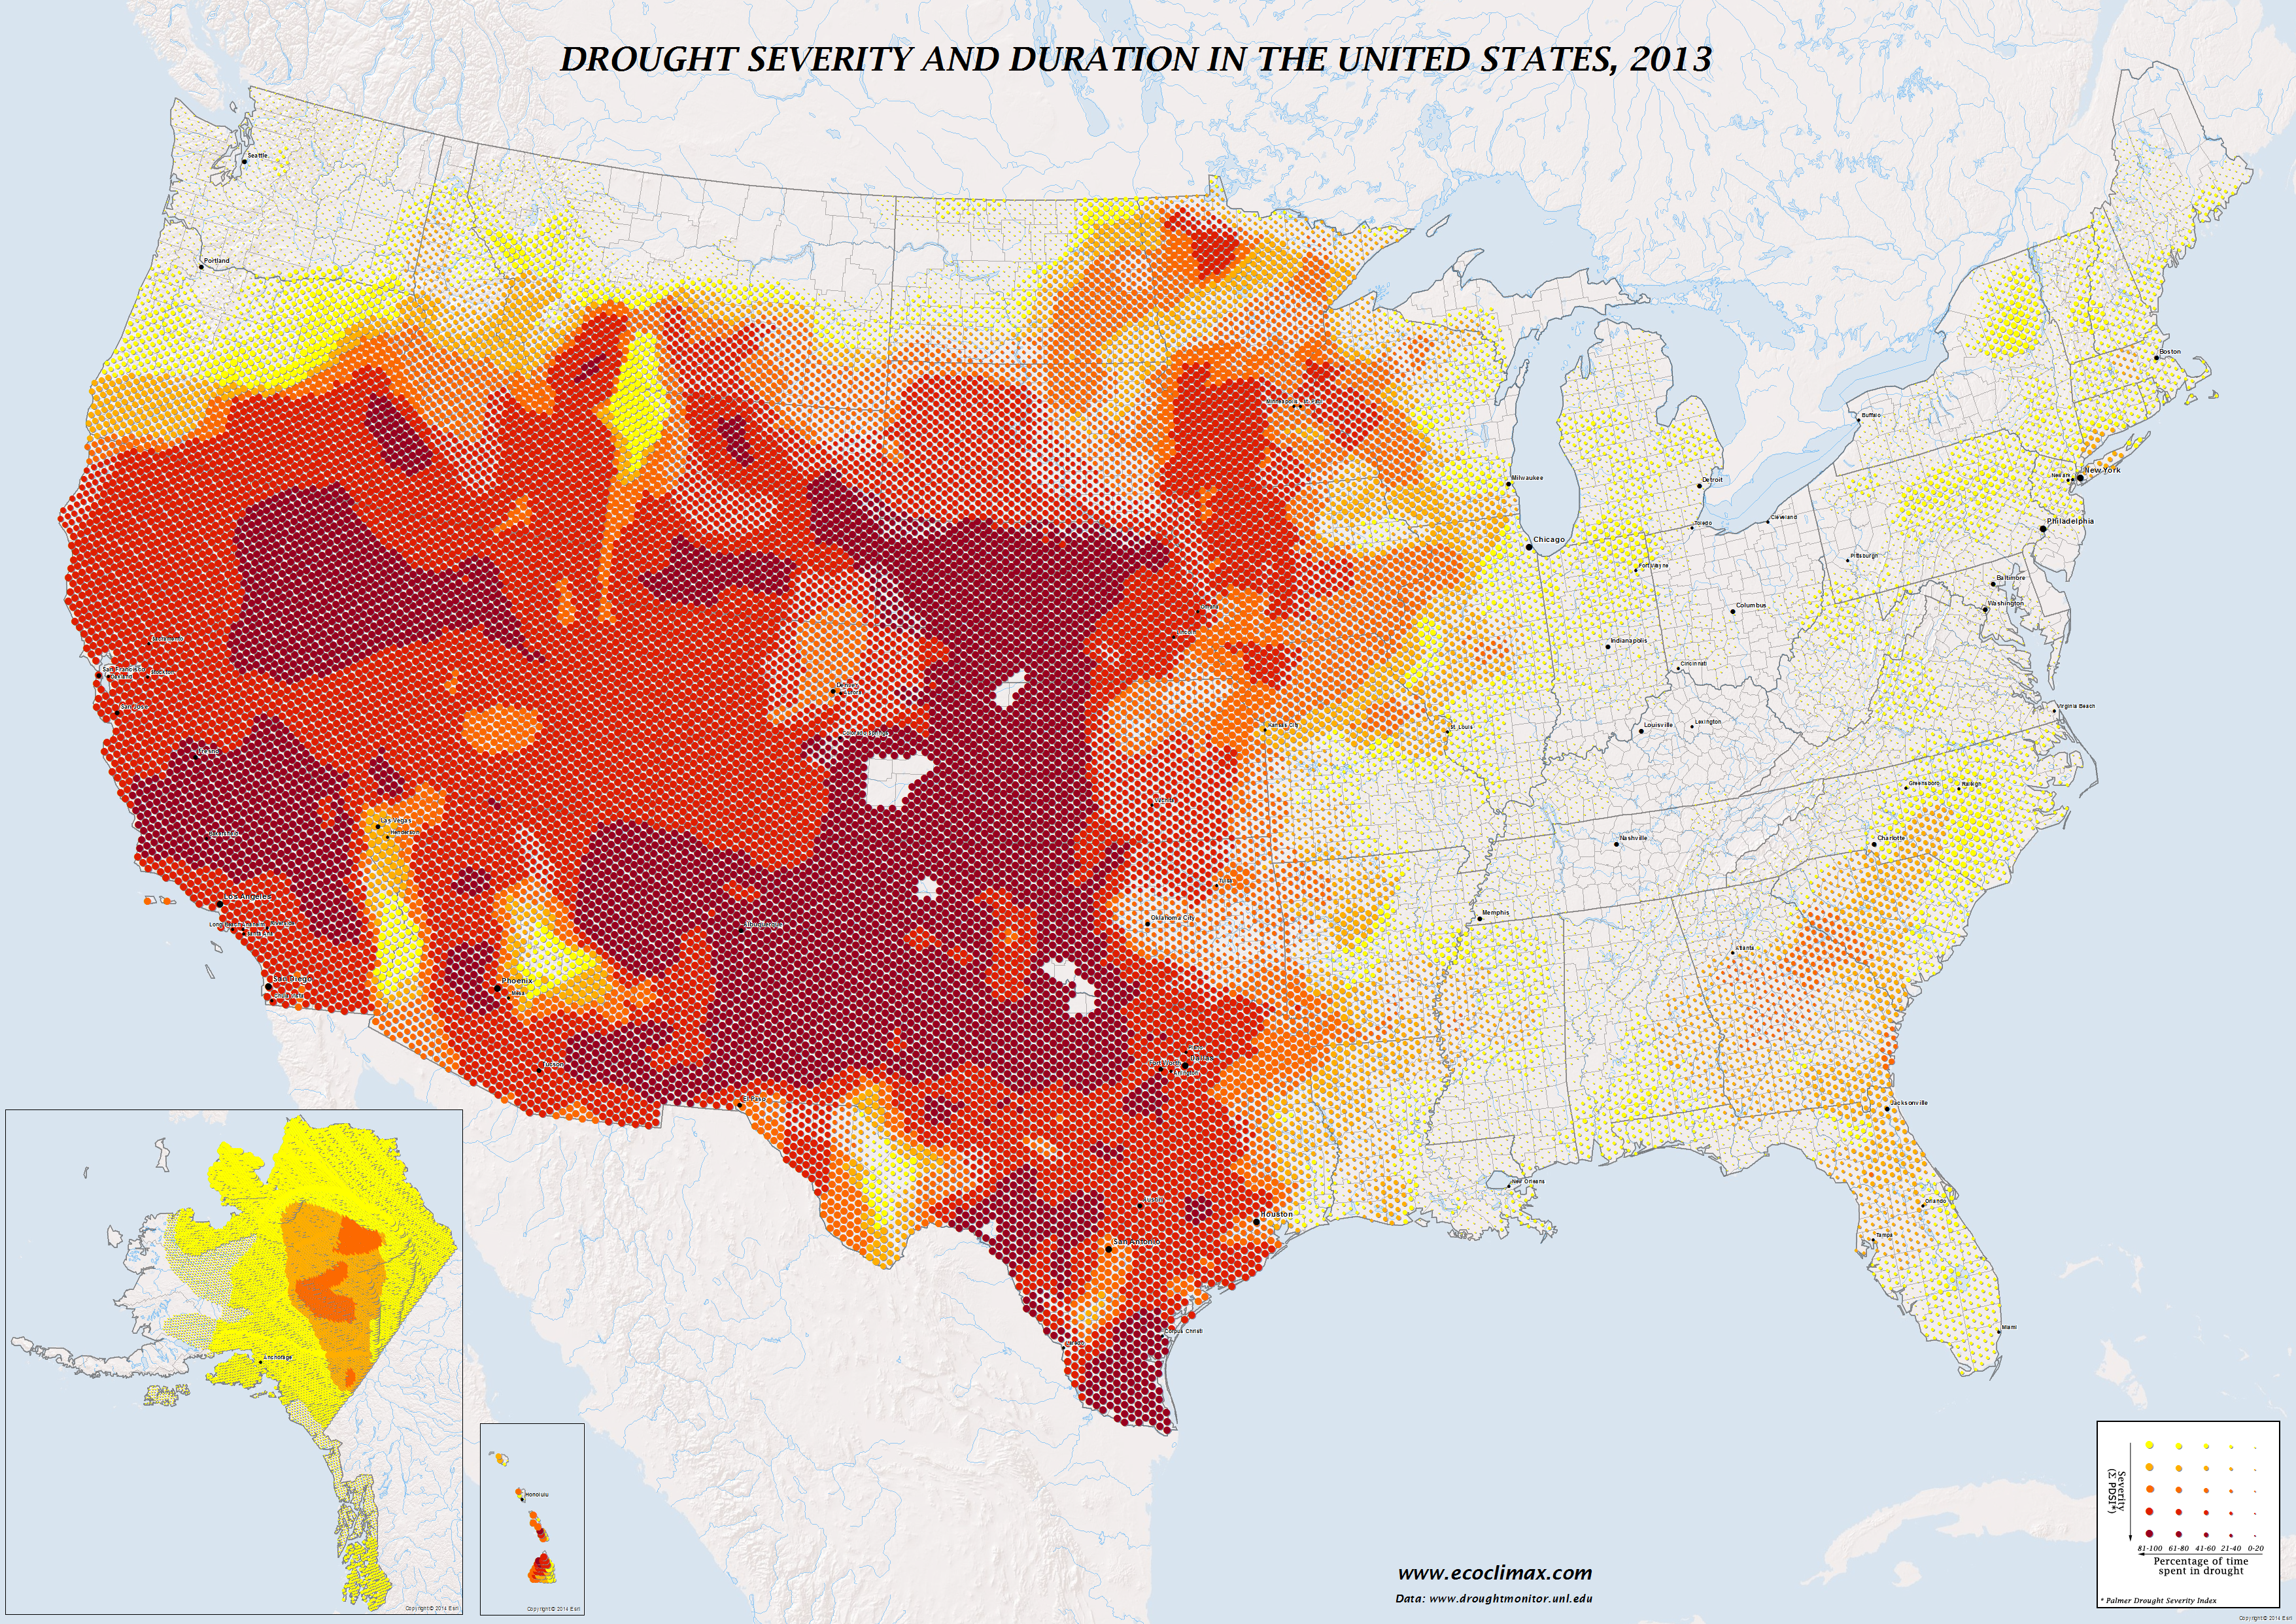 Drought severity & duration in the U.S, 2013